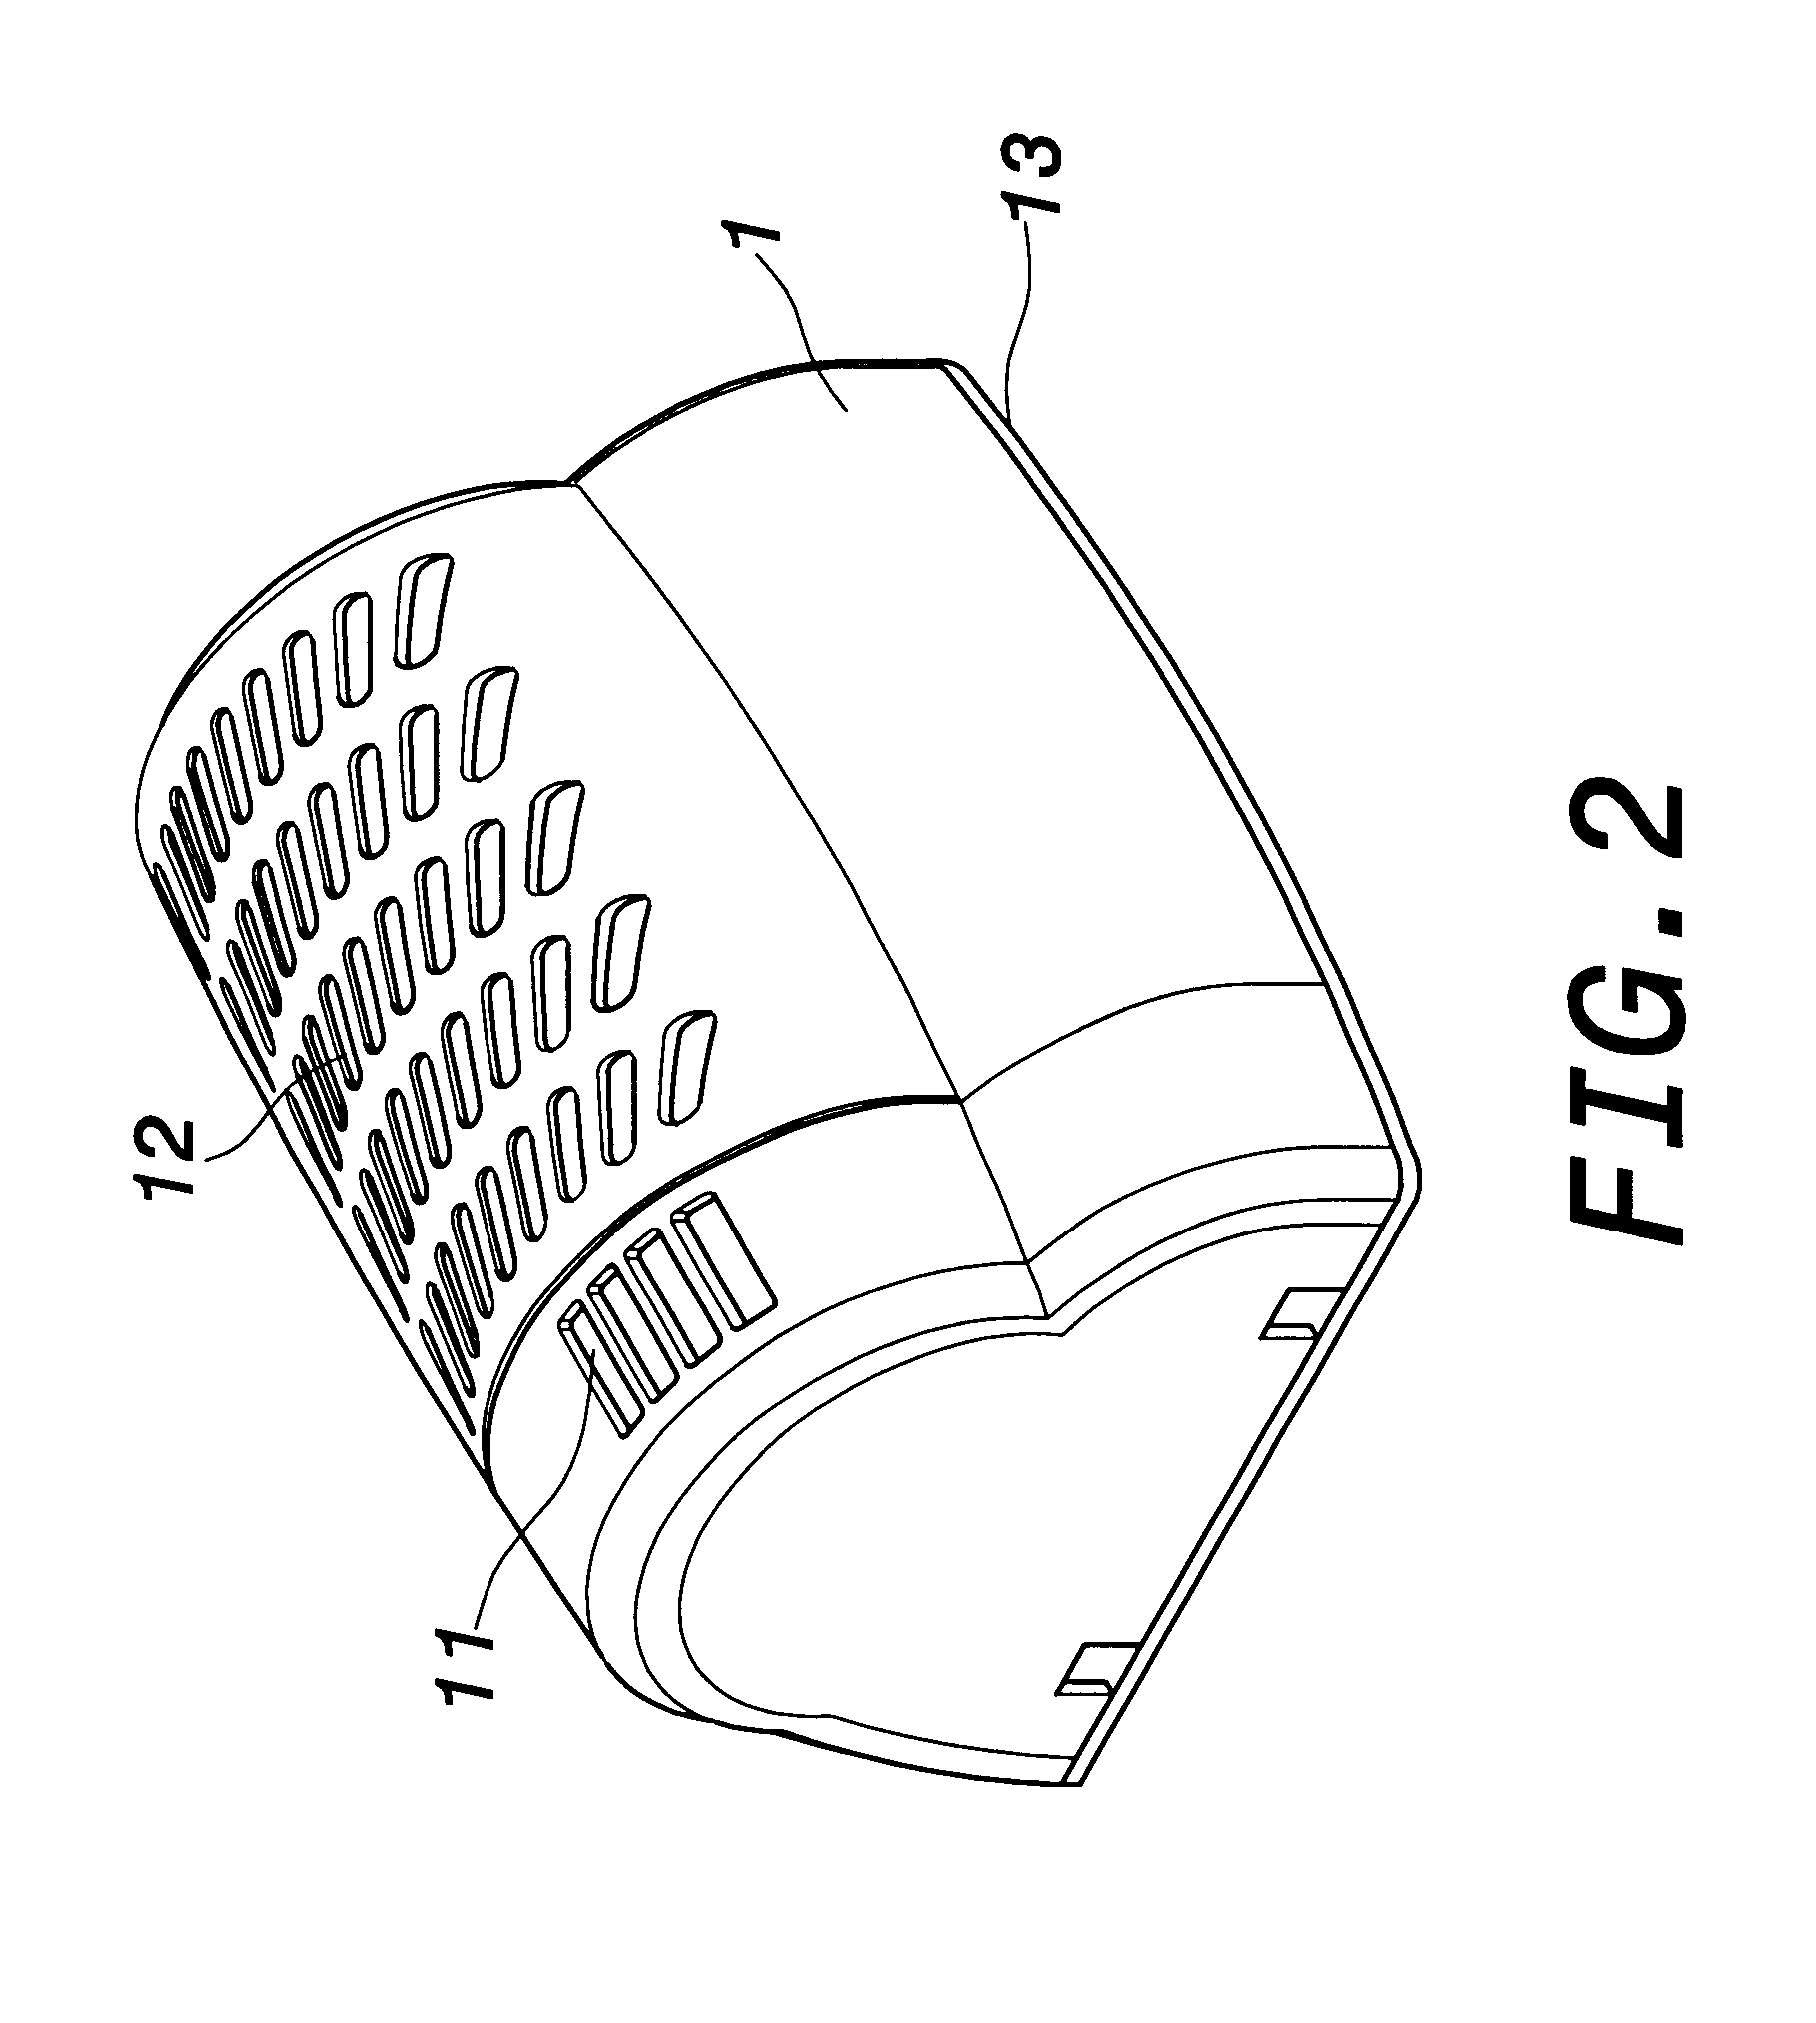 Air cleaning apparatus